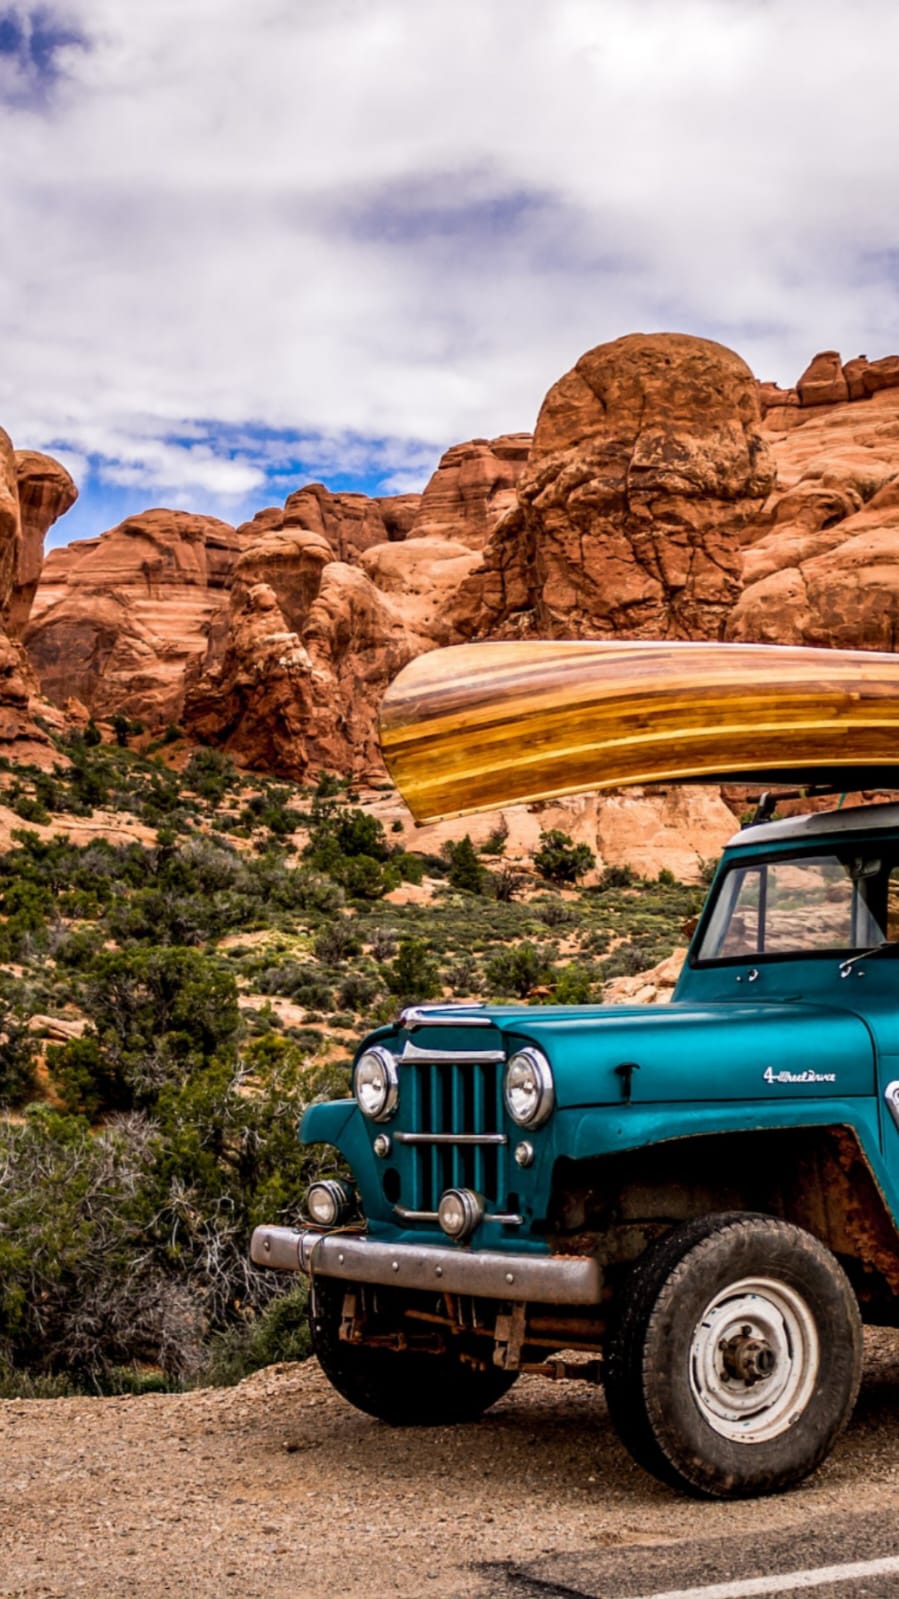 7 Best Places To Visit In Arches National Park, Utah 